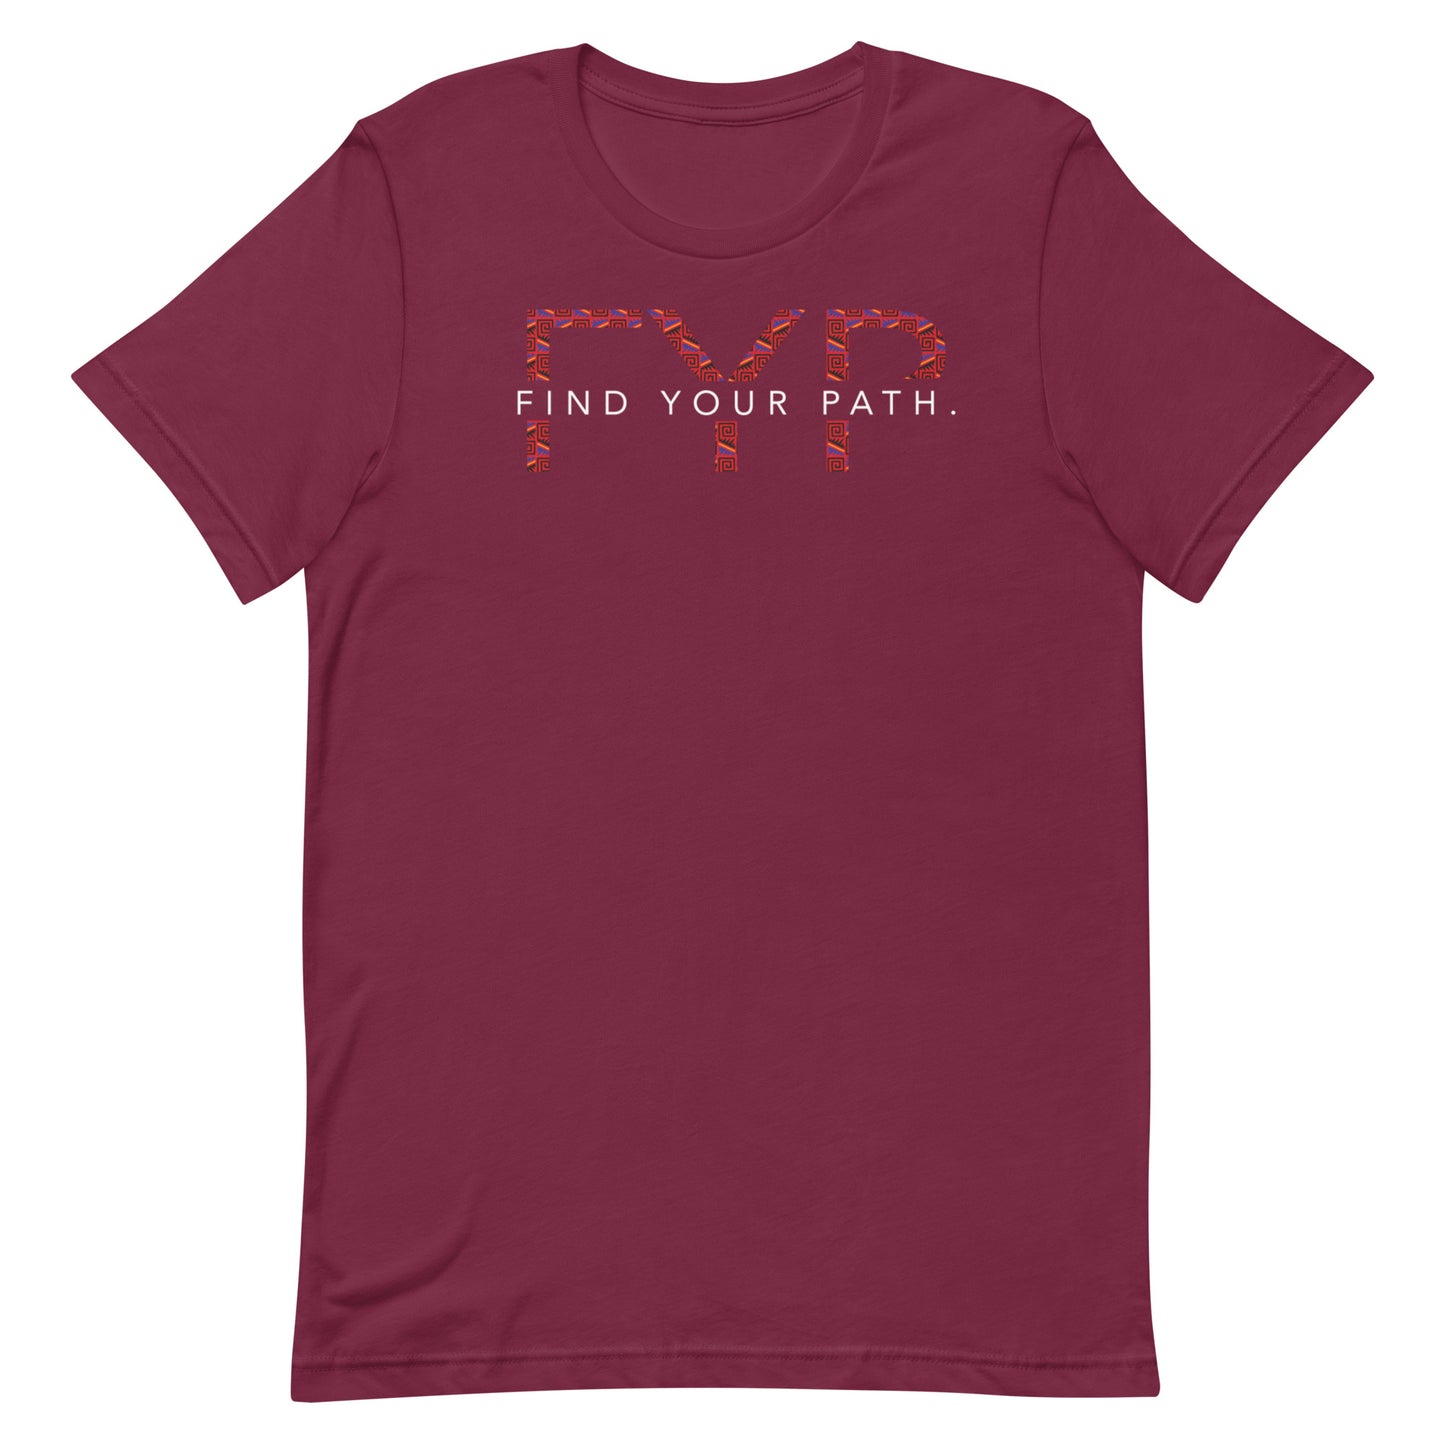 Unisex "Find Your Path" Tee